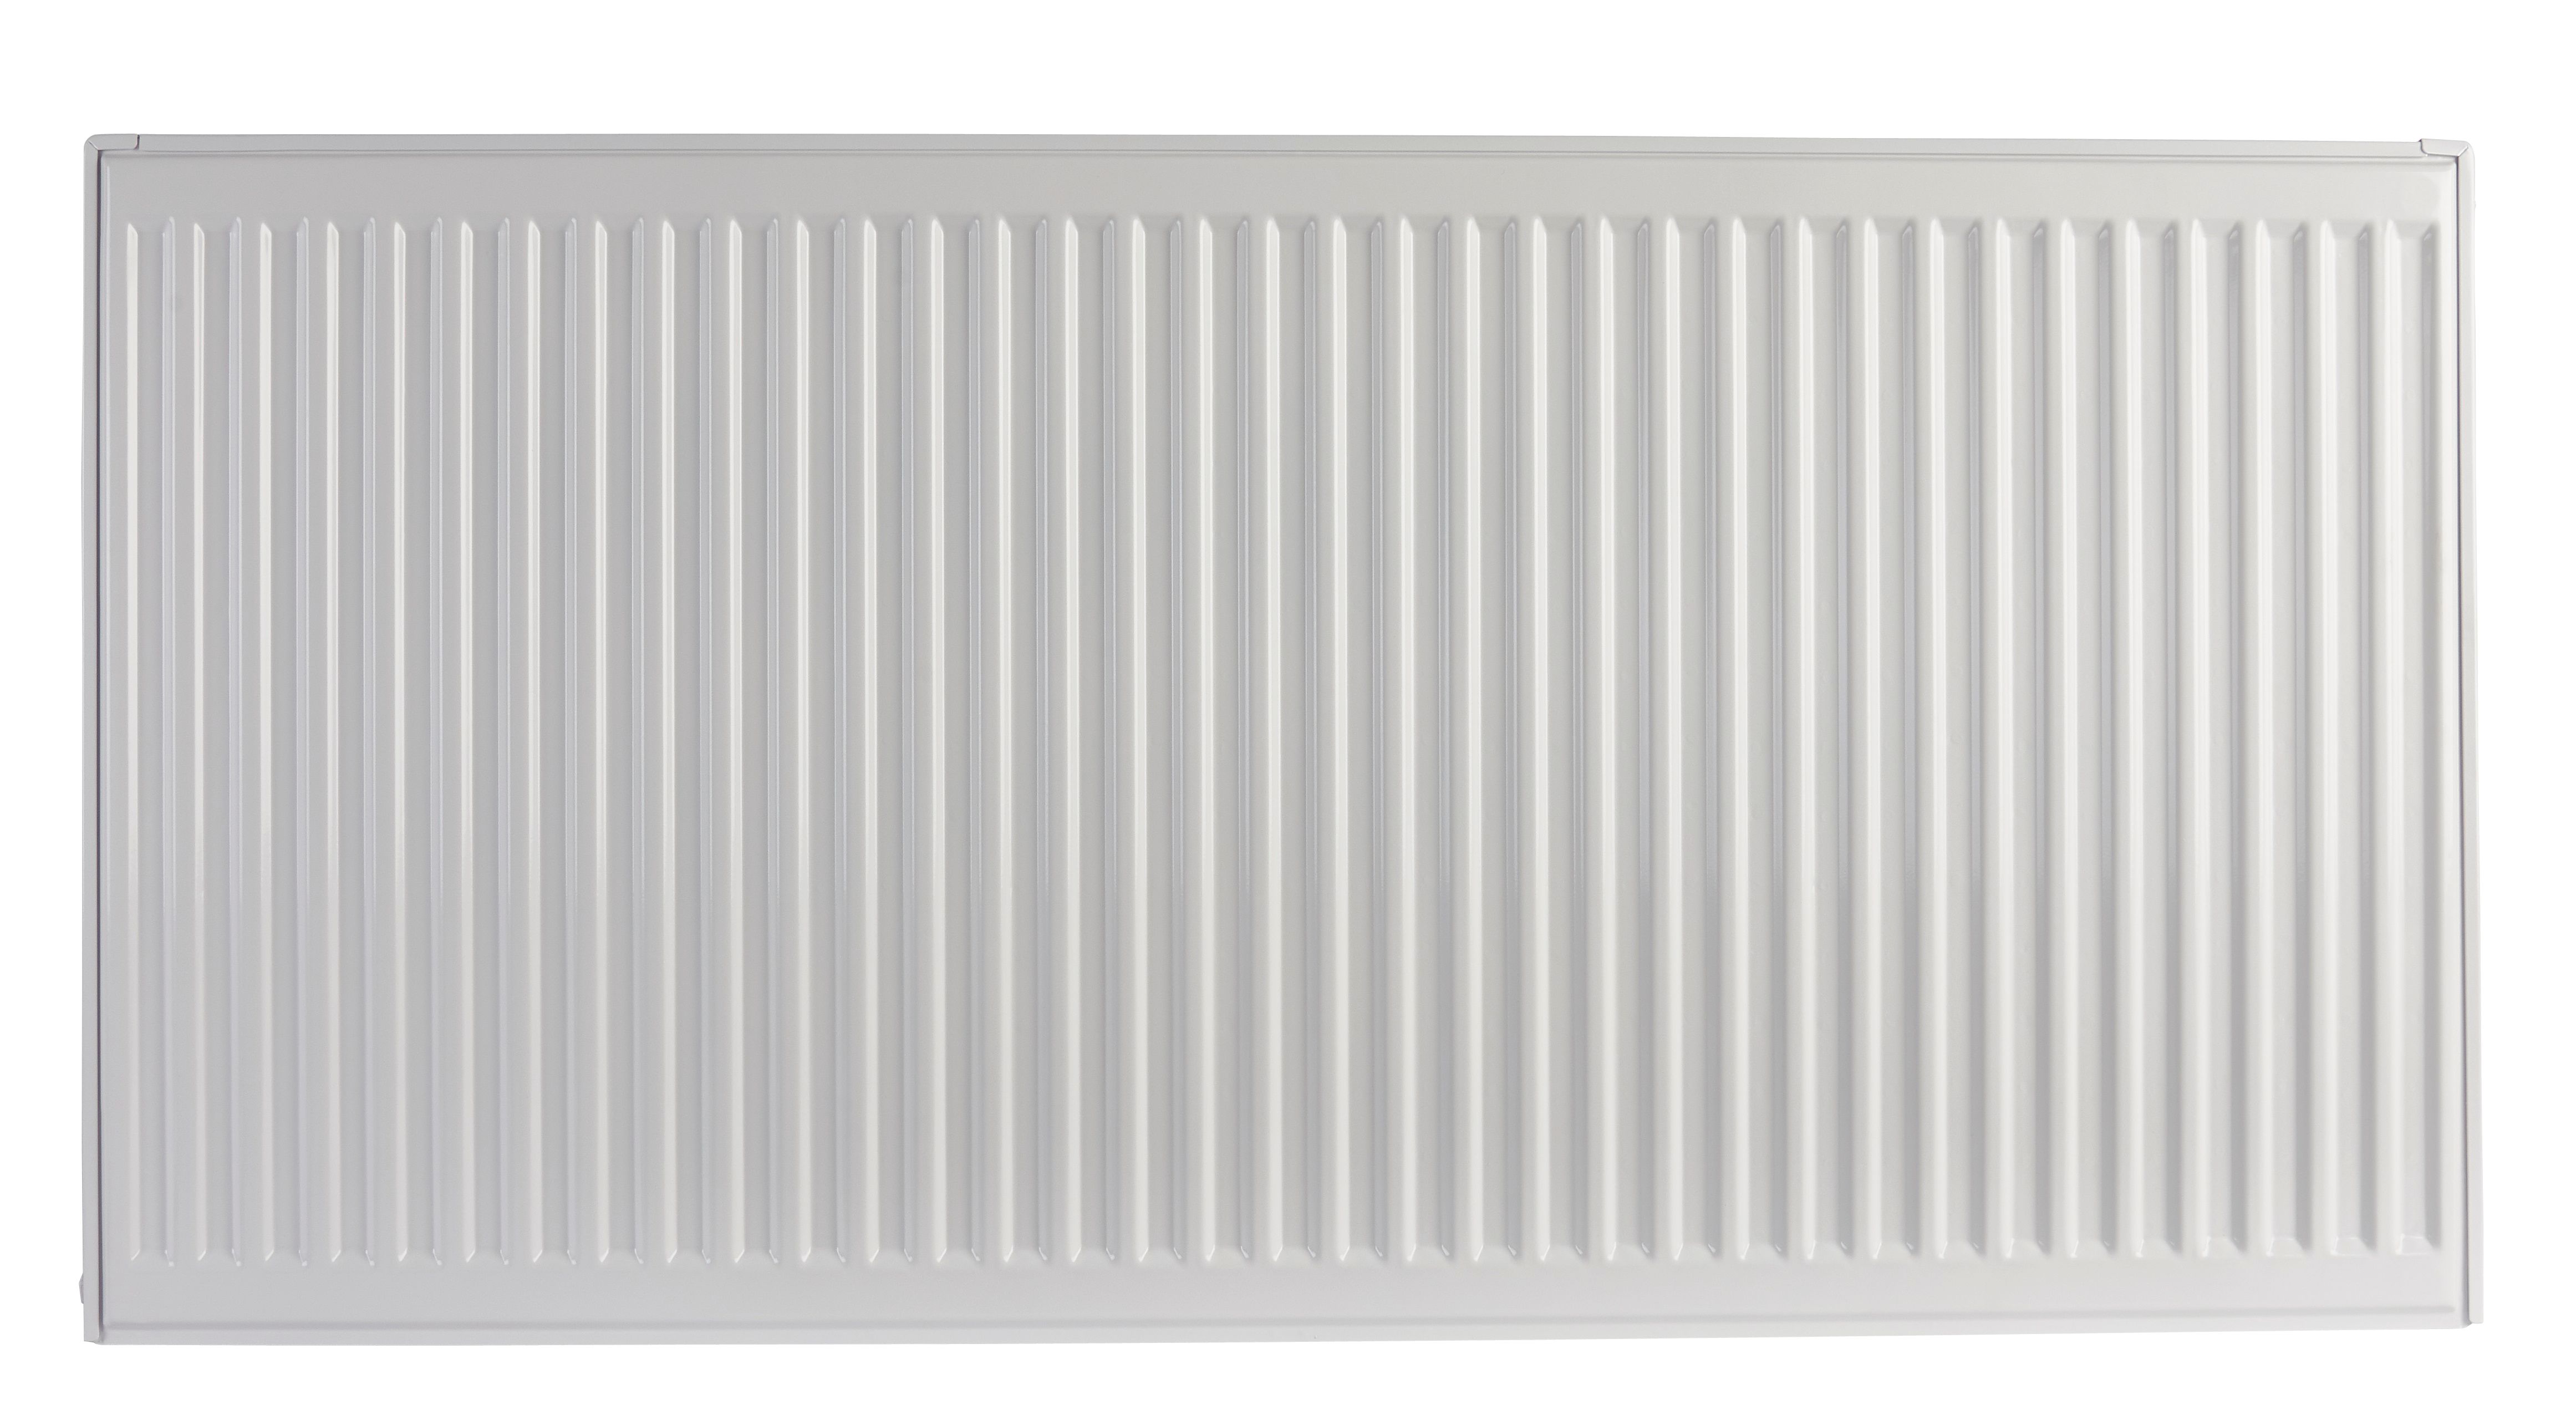 Image of Homeline by Stelrad 600 x 1200mm Type 22 Double Panel Premium Double Convector Radiator